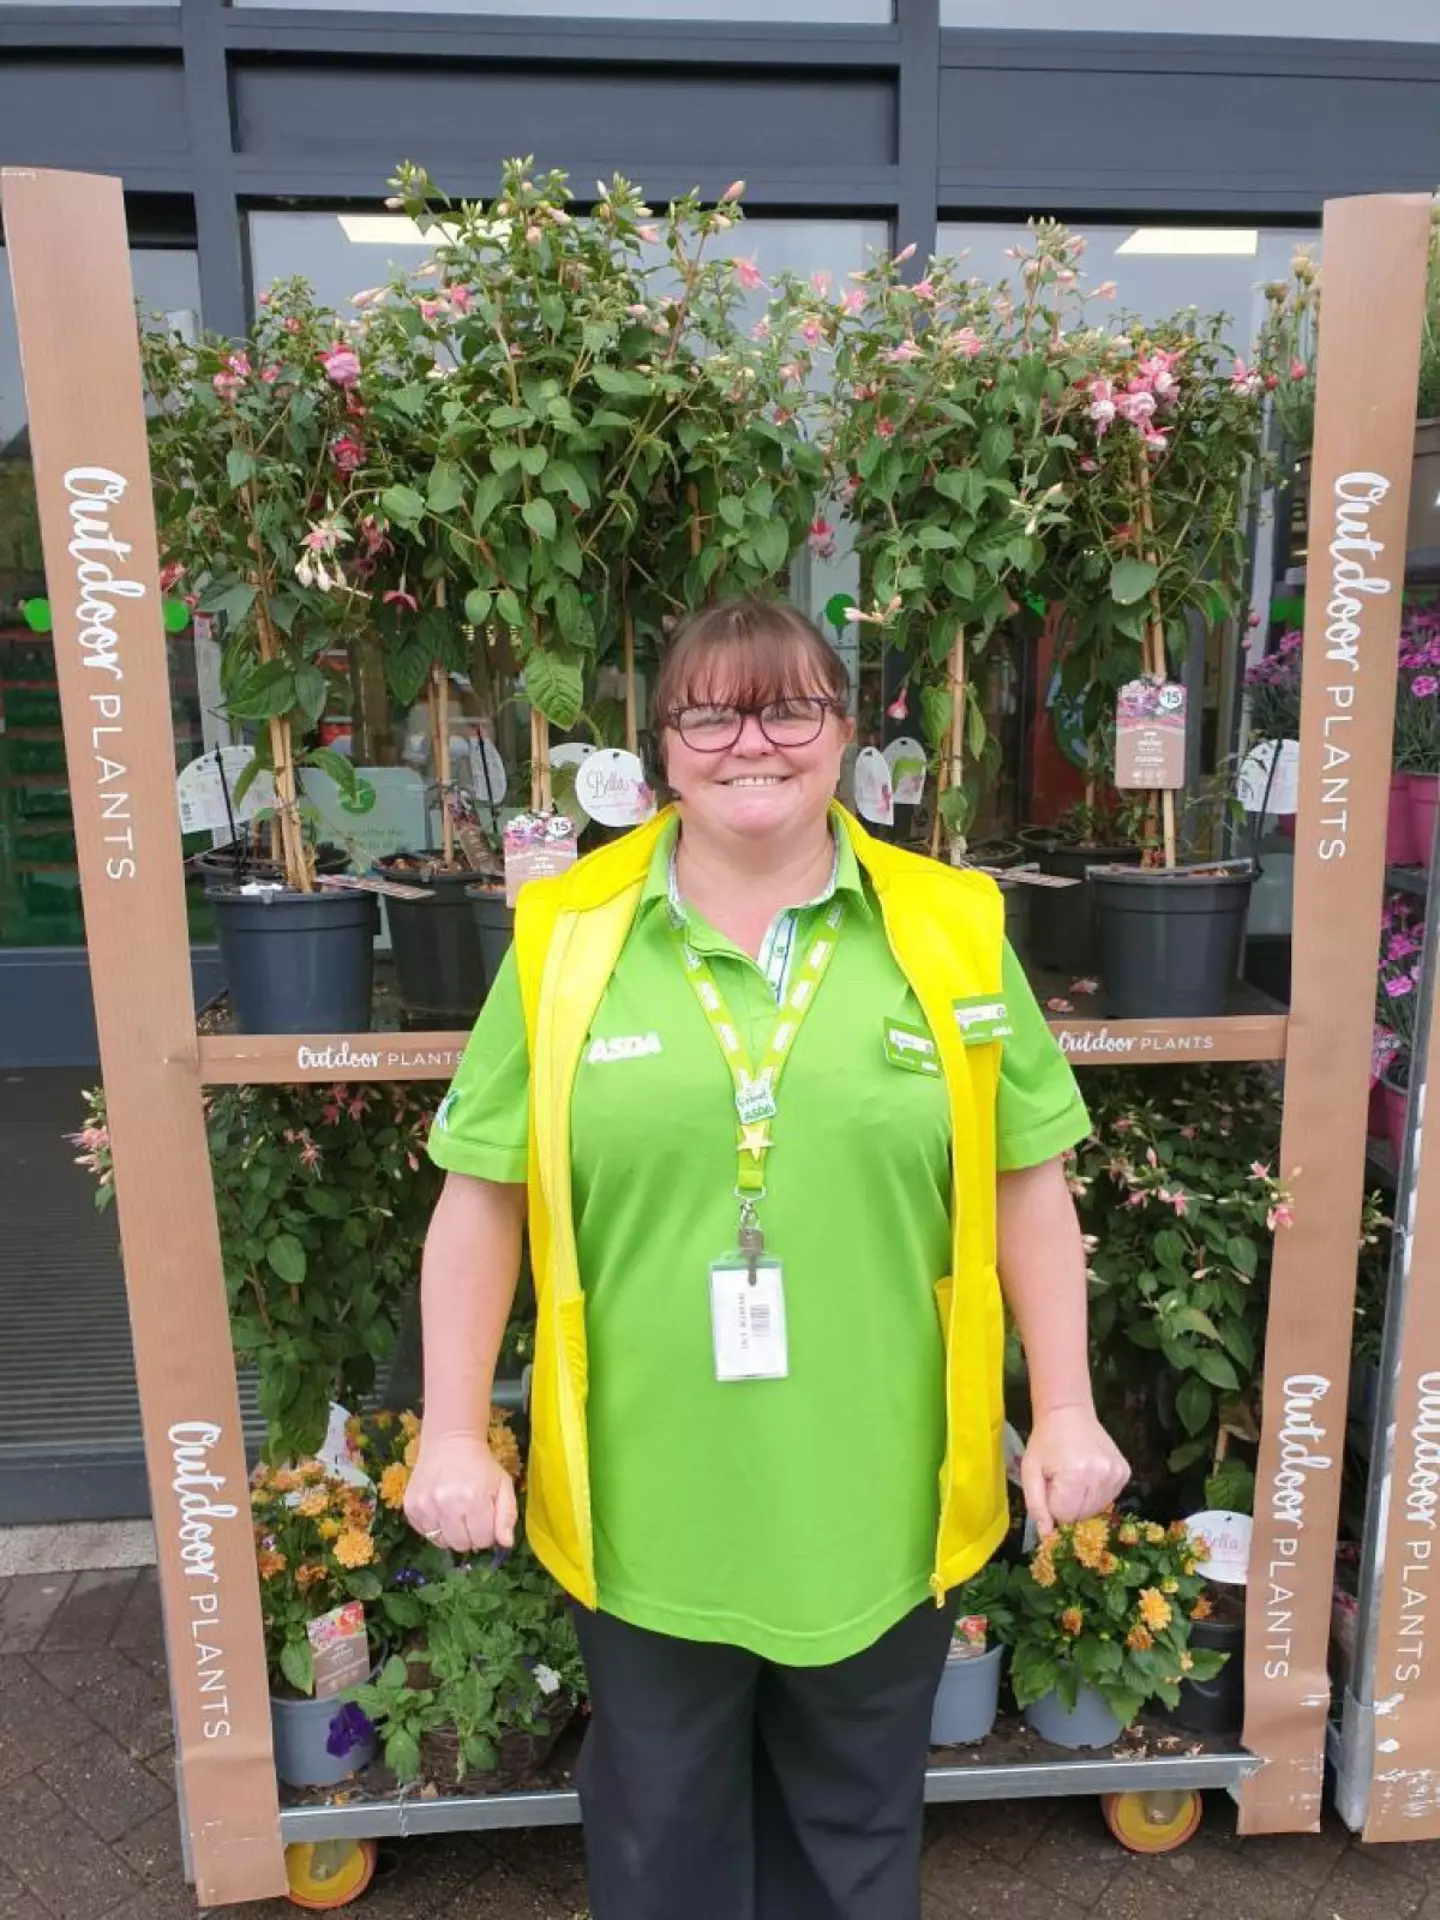 Asda employee Joanne Lang saved a young boy's life while he was visiting the store with his mum.